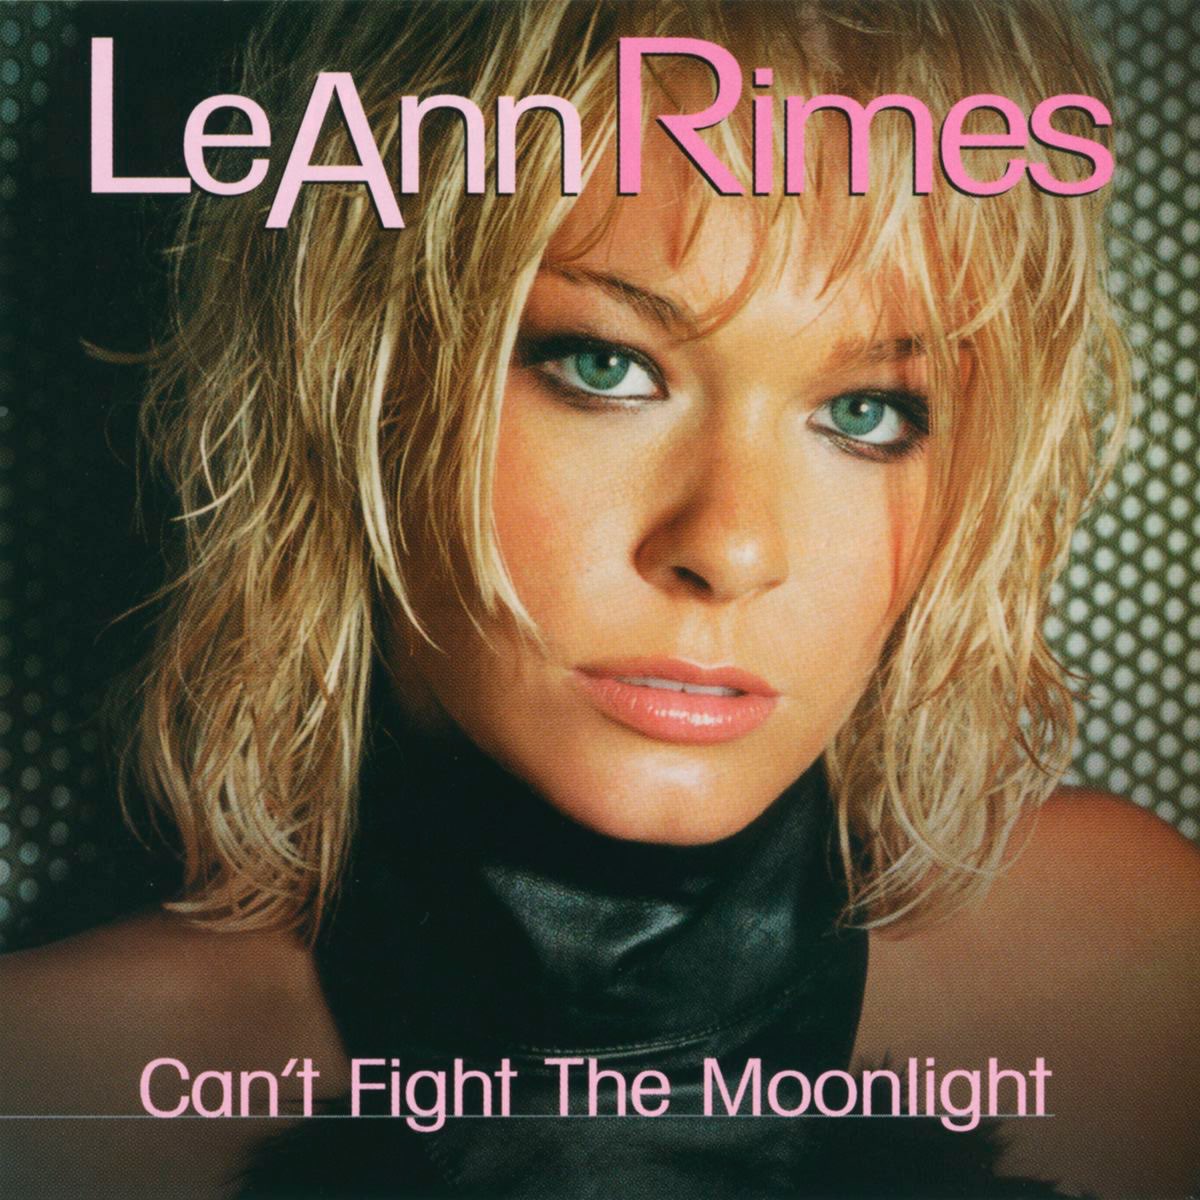 Can't Fight the Moonlight (Dance Mixes) - Album by LeAnn Rimes - Apple Music